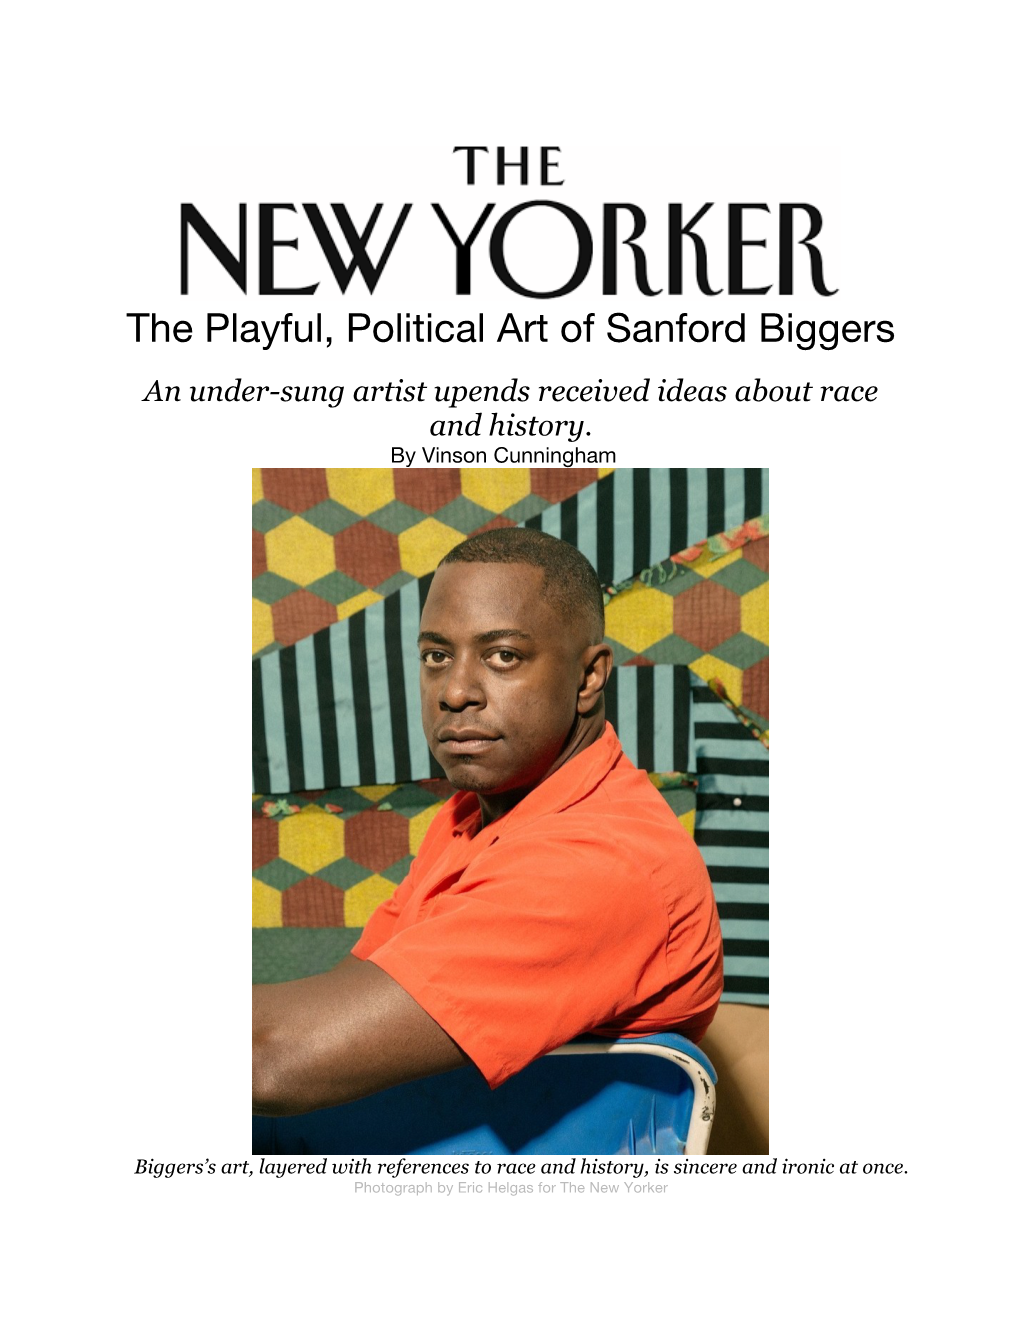 The Playful, Political Art of Sanford Biggers an Under-Sung Artist Upends Received Ideas About Race and History